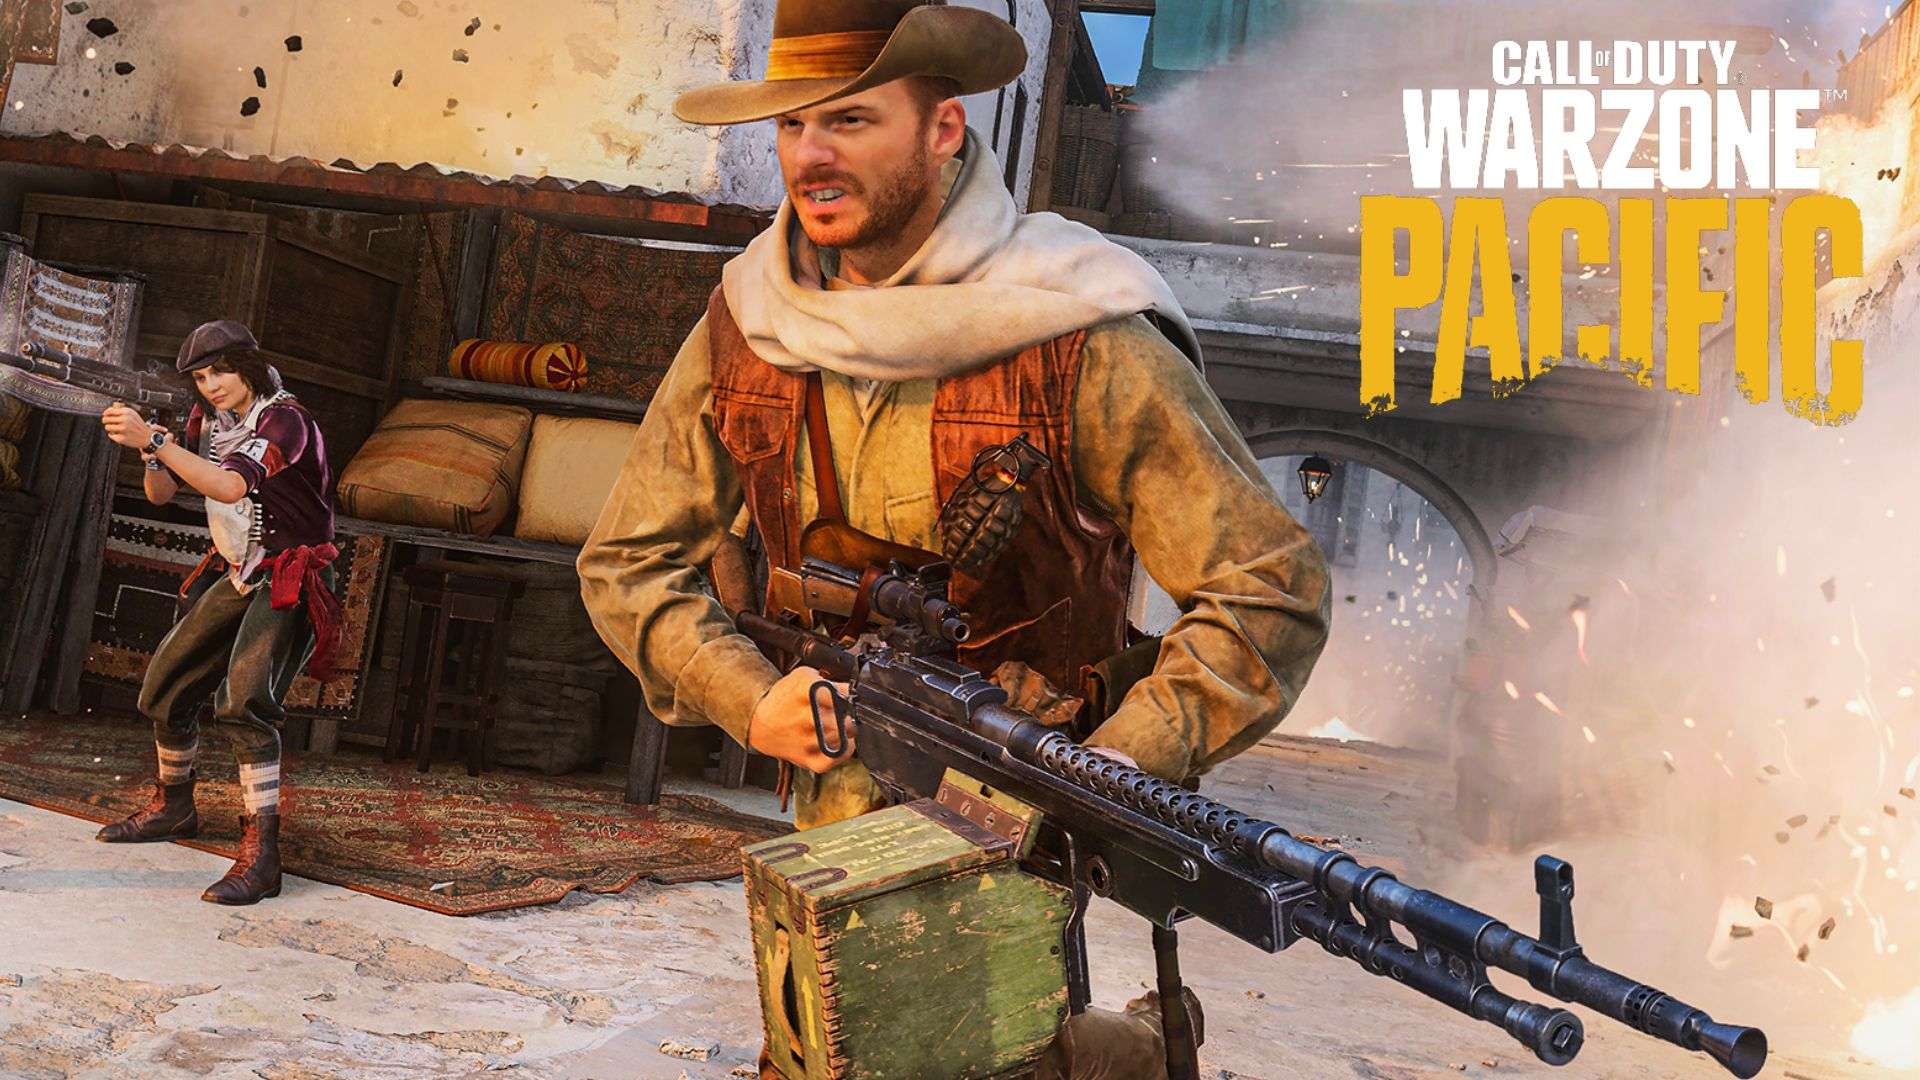 Vanguard character holding Whitley LMG with Warzone logo